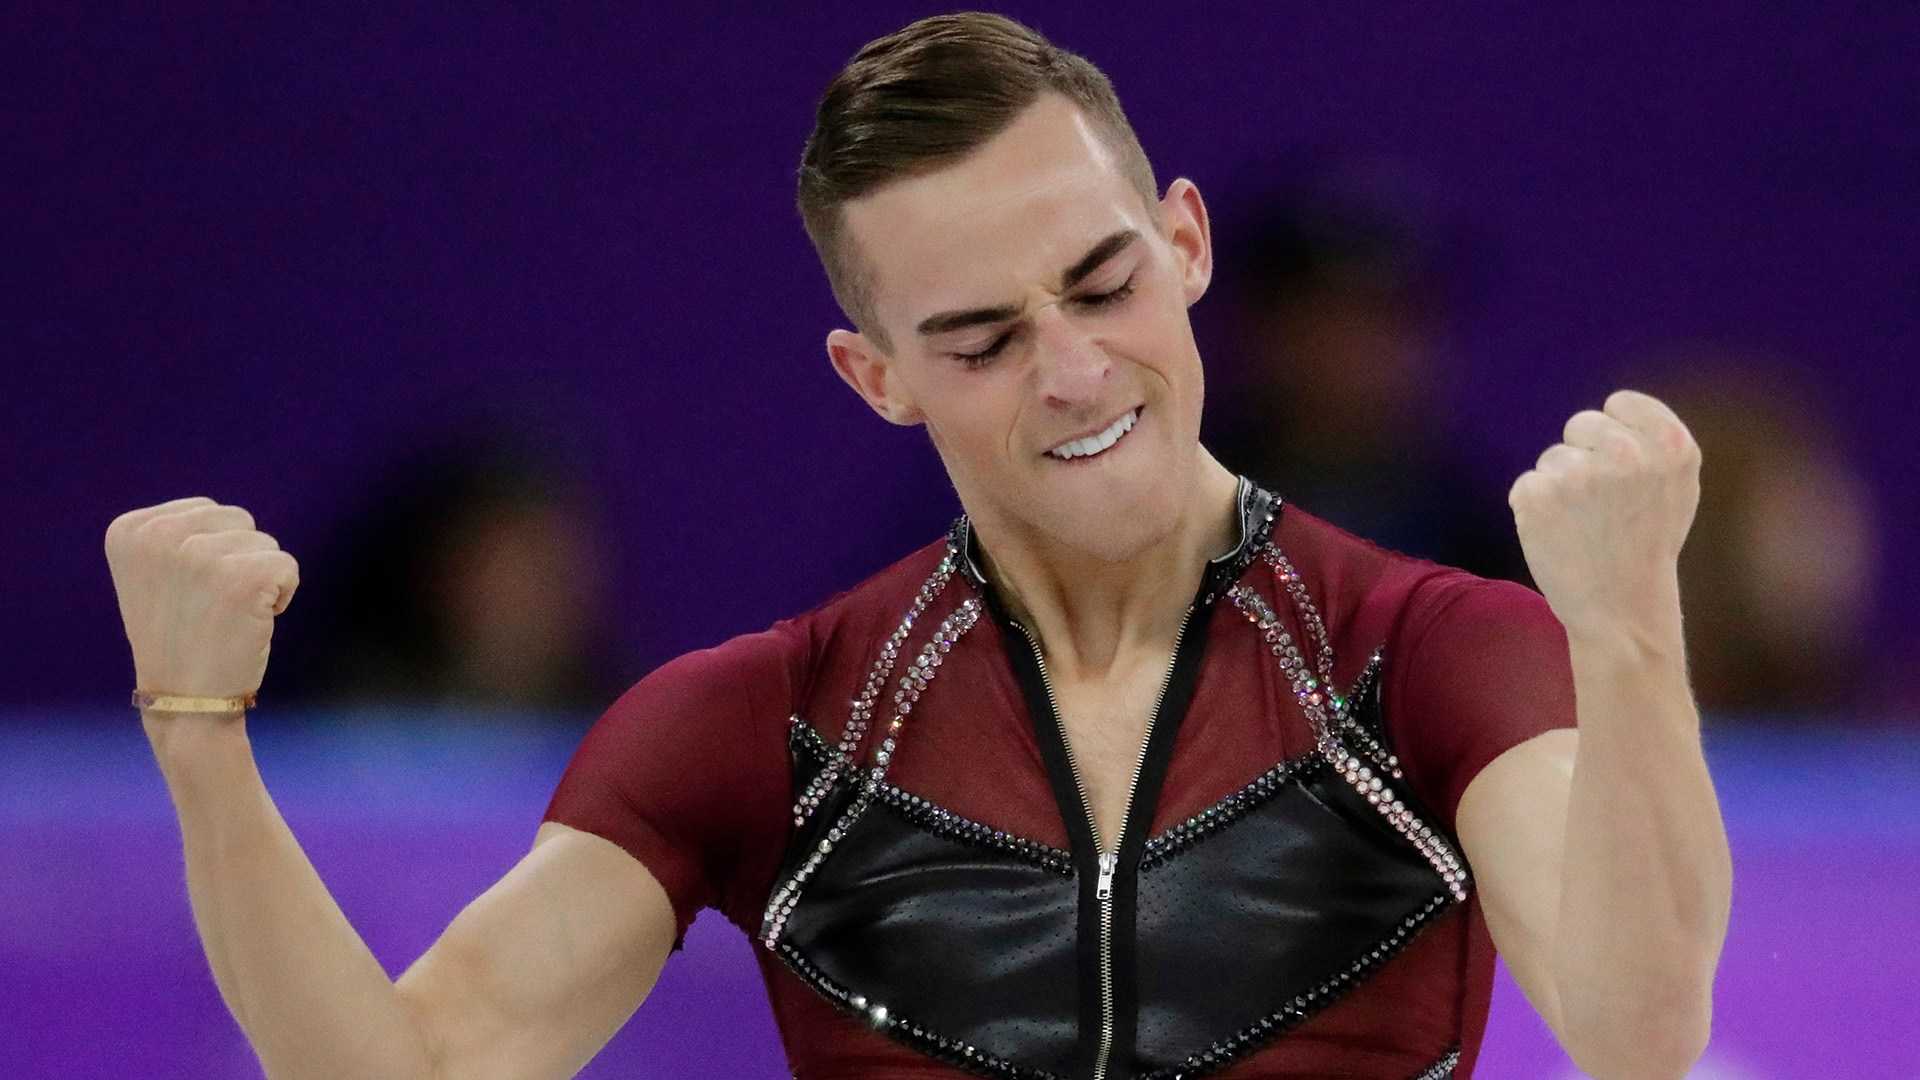 Adam Rippon back as NBC correspondent for rest of PyeongChang Games